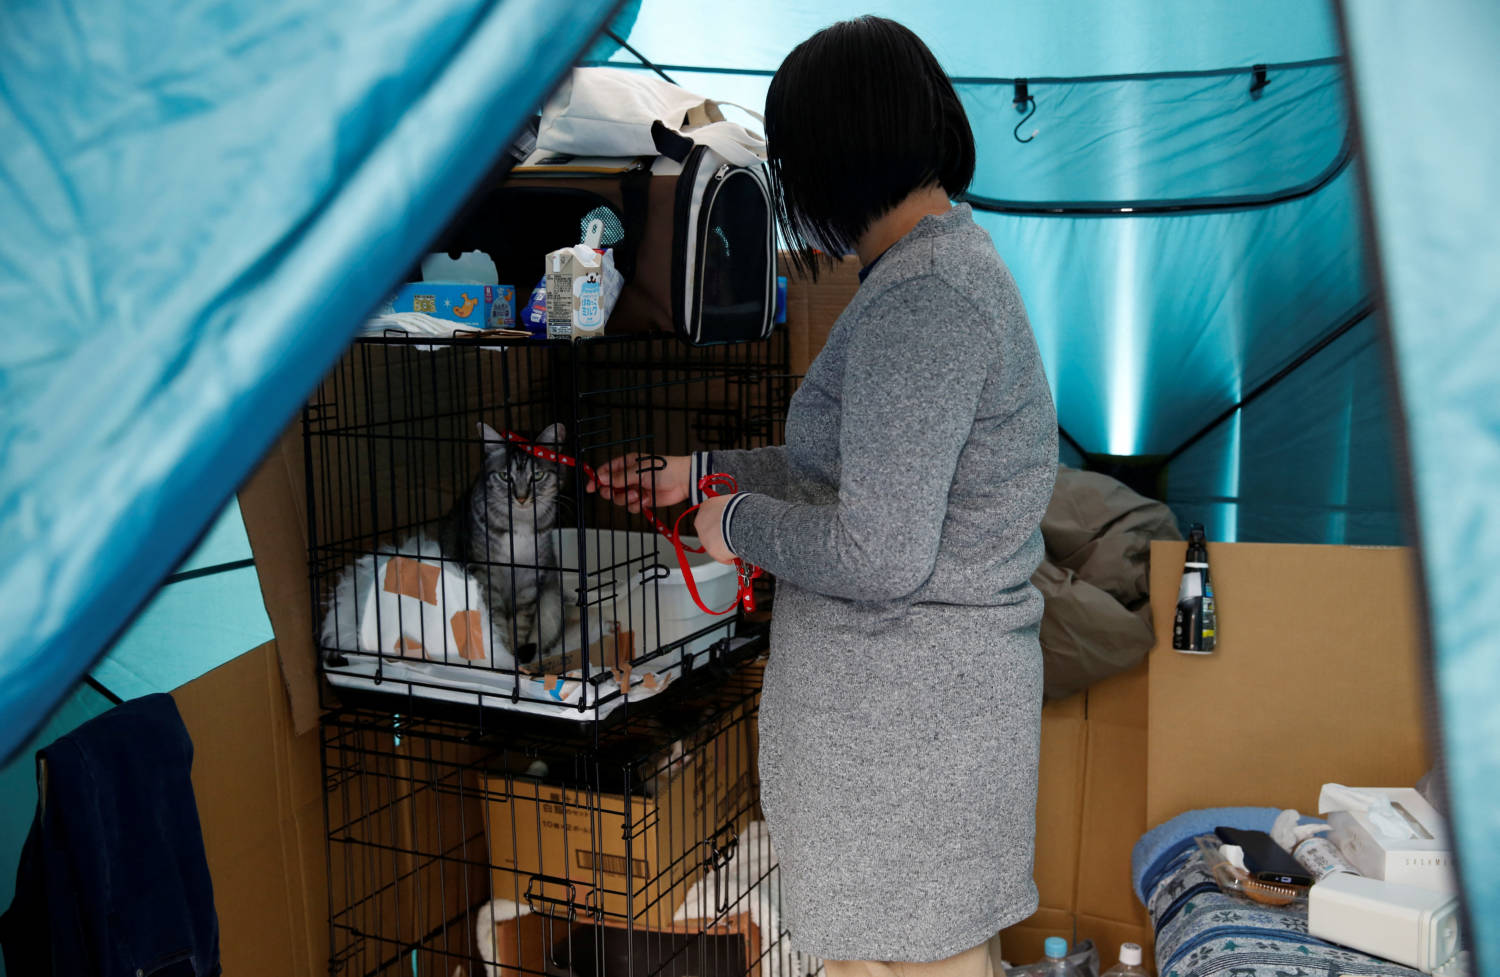 Earthquake Evacuee Yoshimi Tomita Plays With Her Cat Raito After Surviving An Earthquake That Hit On New Year’s Day, At A Pet Friendly Evacuation Centre In Suzu